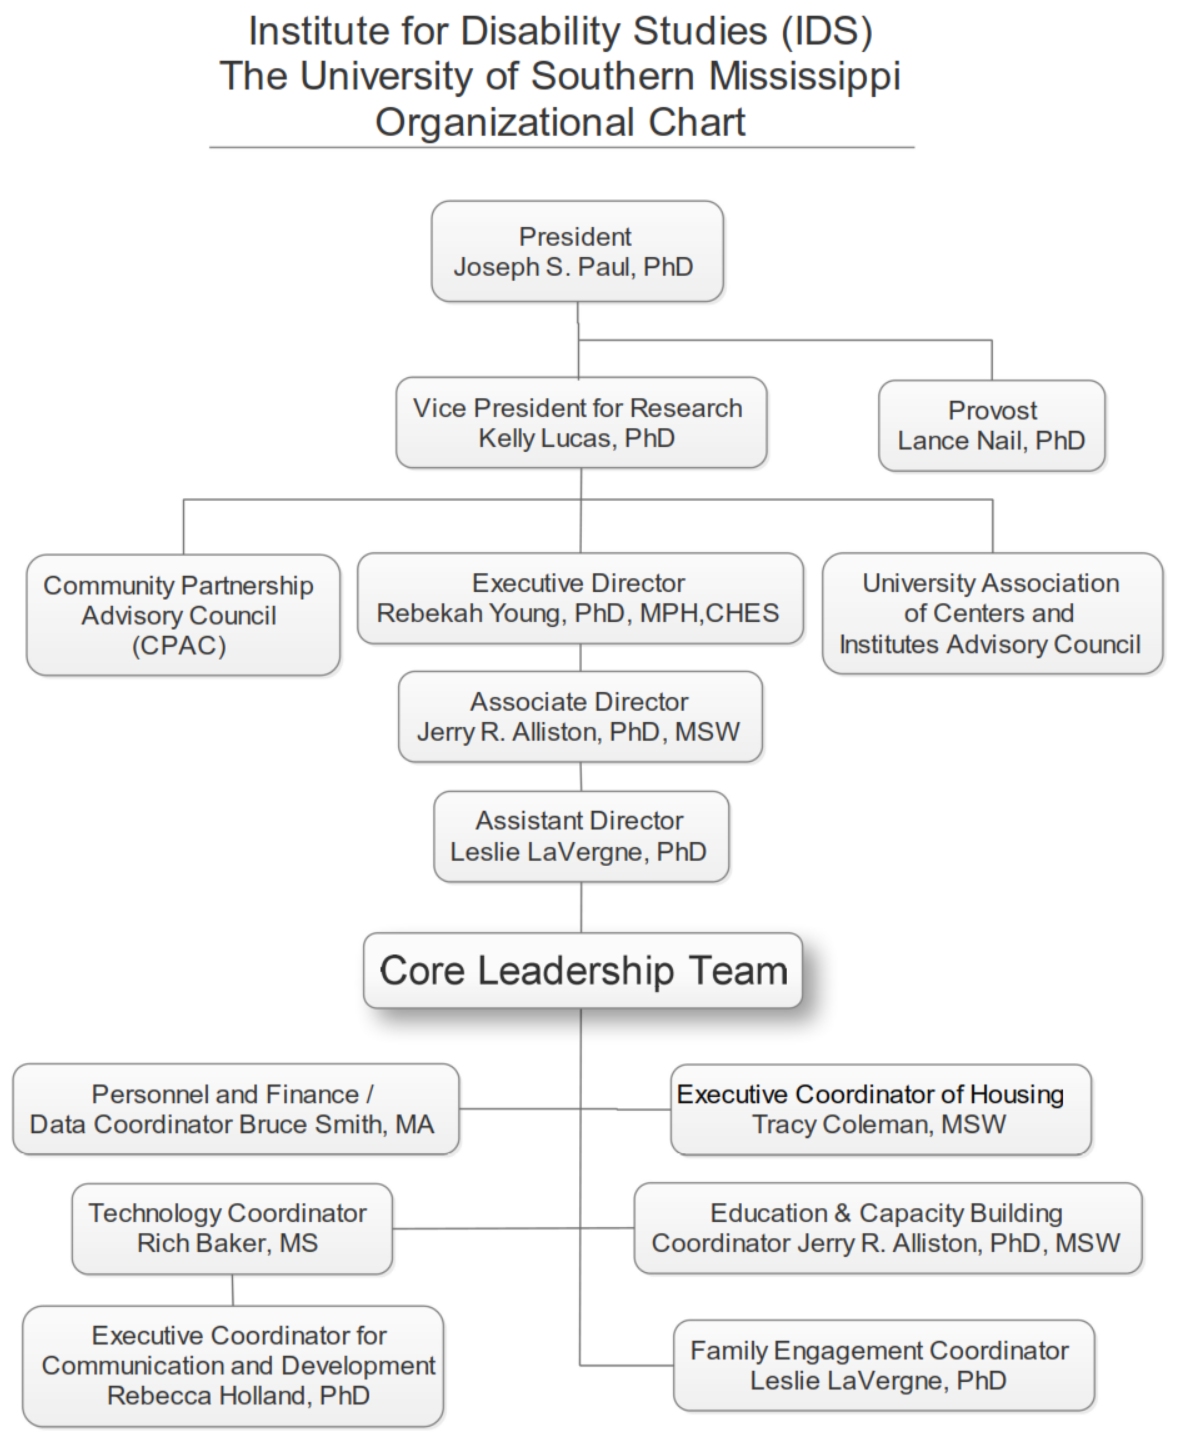 Institute for Disability Studies Org Chart